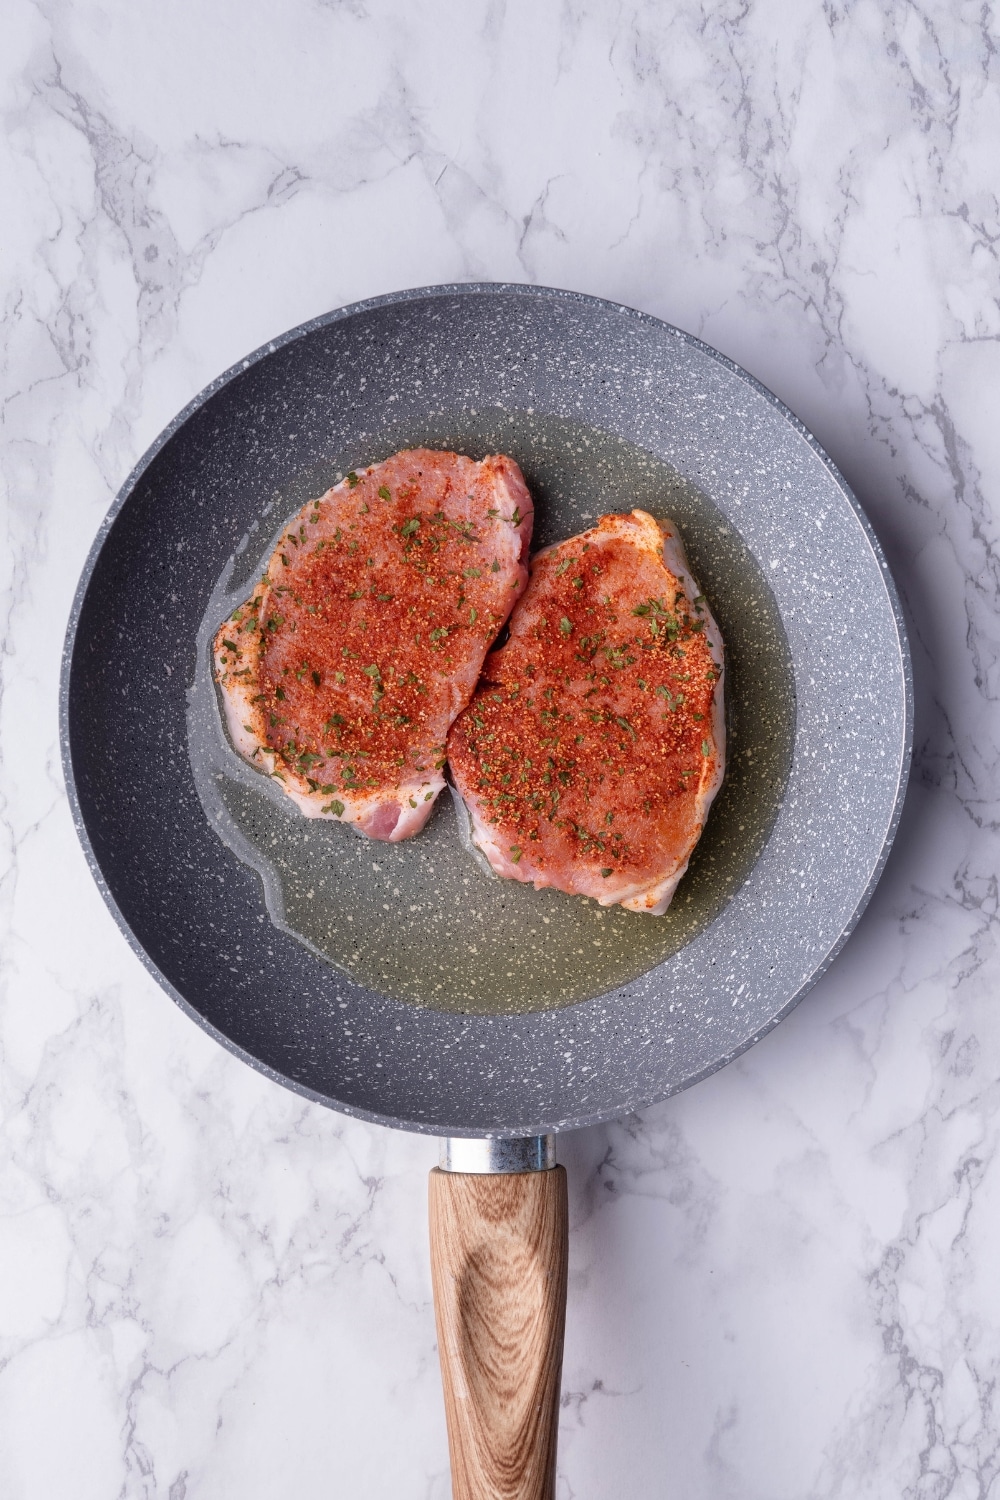 Uncooked seasoned pork chops over oil in a speckled grey pan with a wooden handle.